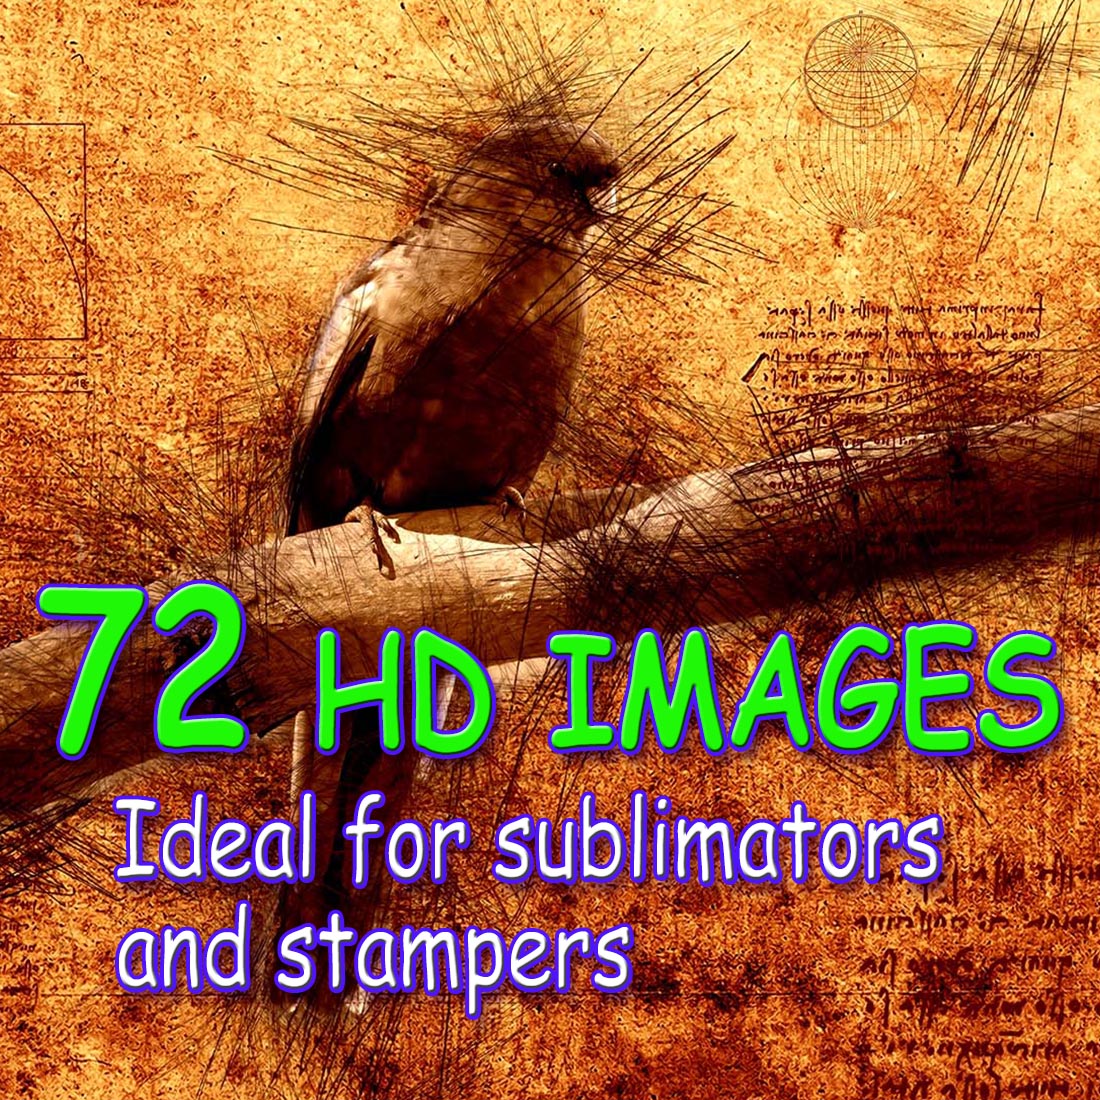 BEAUTIFUL BIRDS - Bundle Of 72 HQ 300 dpi Graphics Ready To Print cover image.